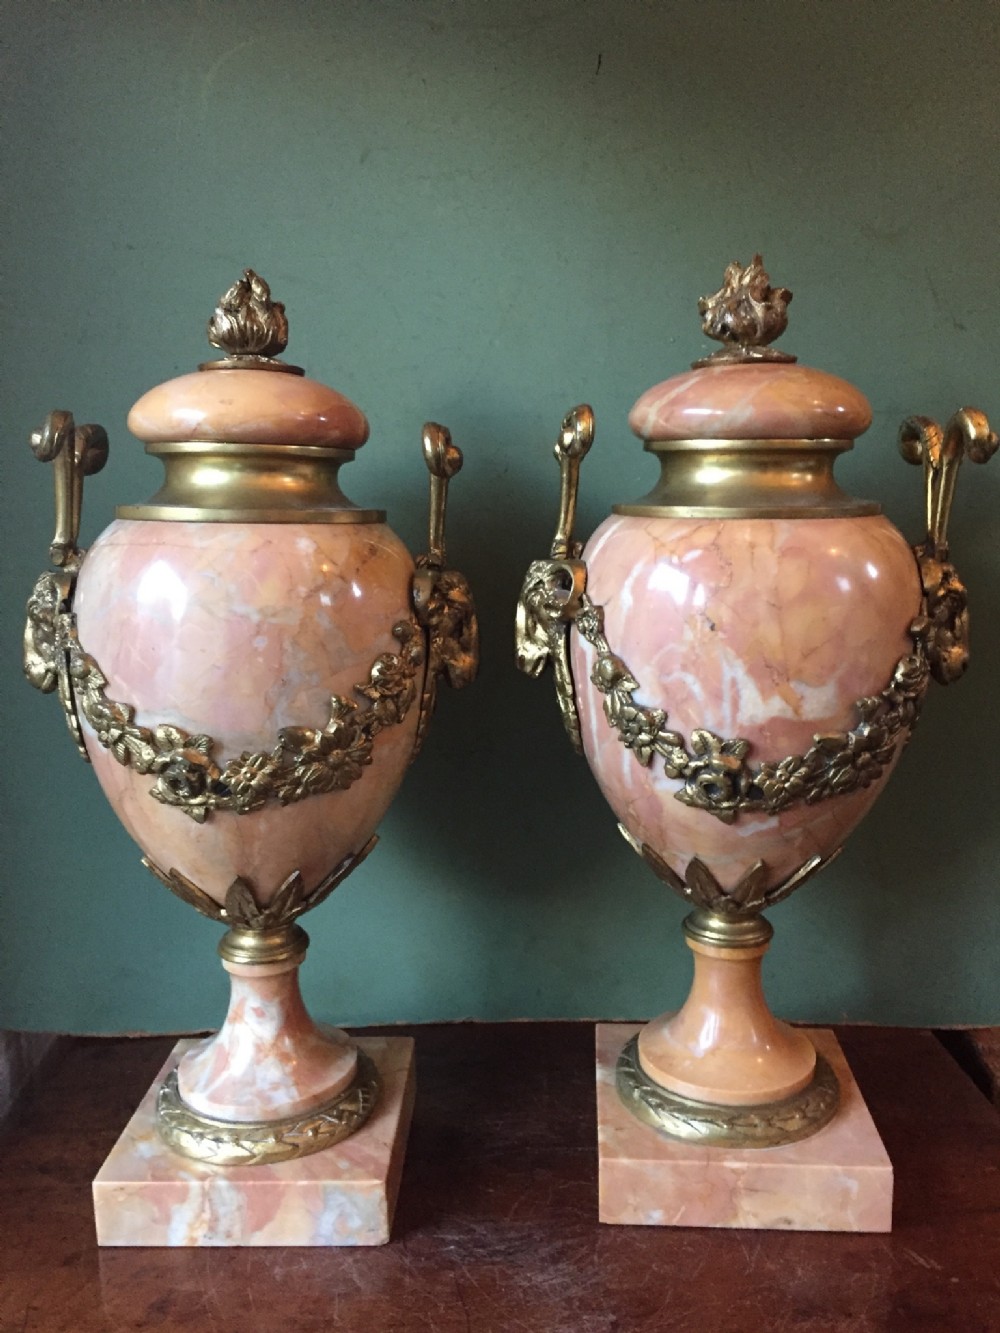 pair of early c20th french louis xvi style ormolumounted marble urns